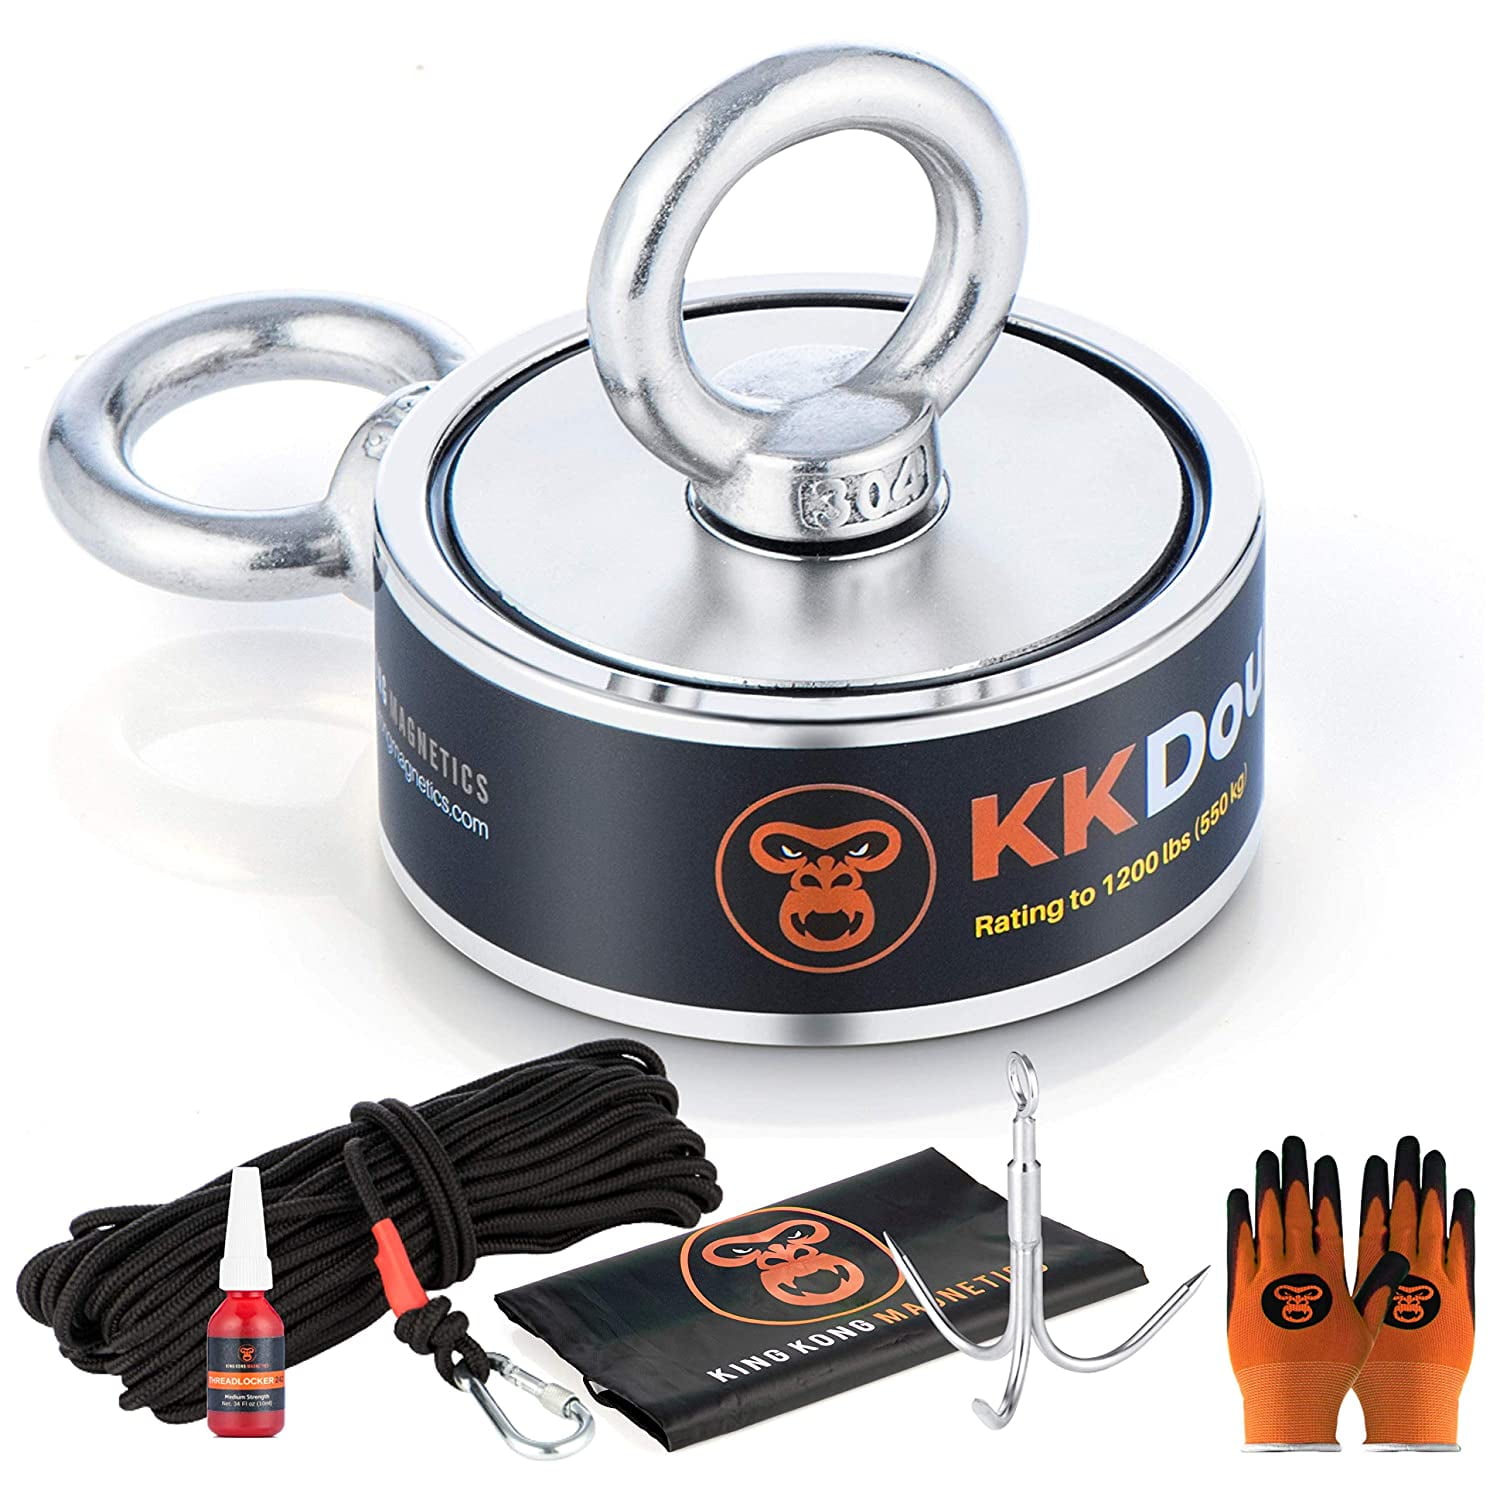 King Kong Magnetics 1200 lbs Pulling Force Magnet Fishing Kit - 3 inch Strong Neodymium Fishing Magnets-Gloves, Nylon Rope, Hook, A Bag, Thread